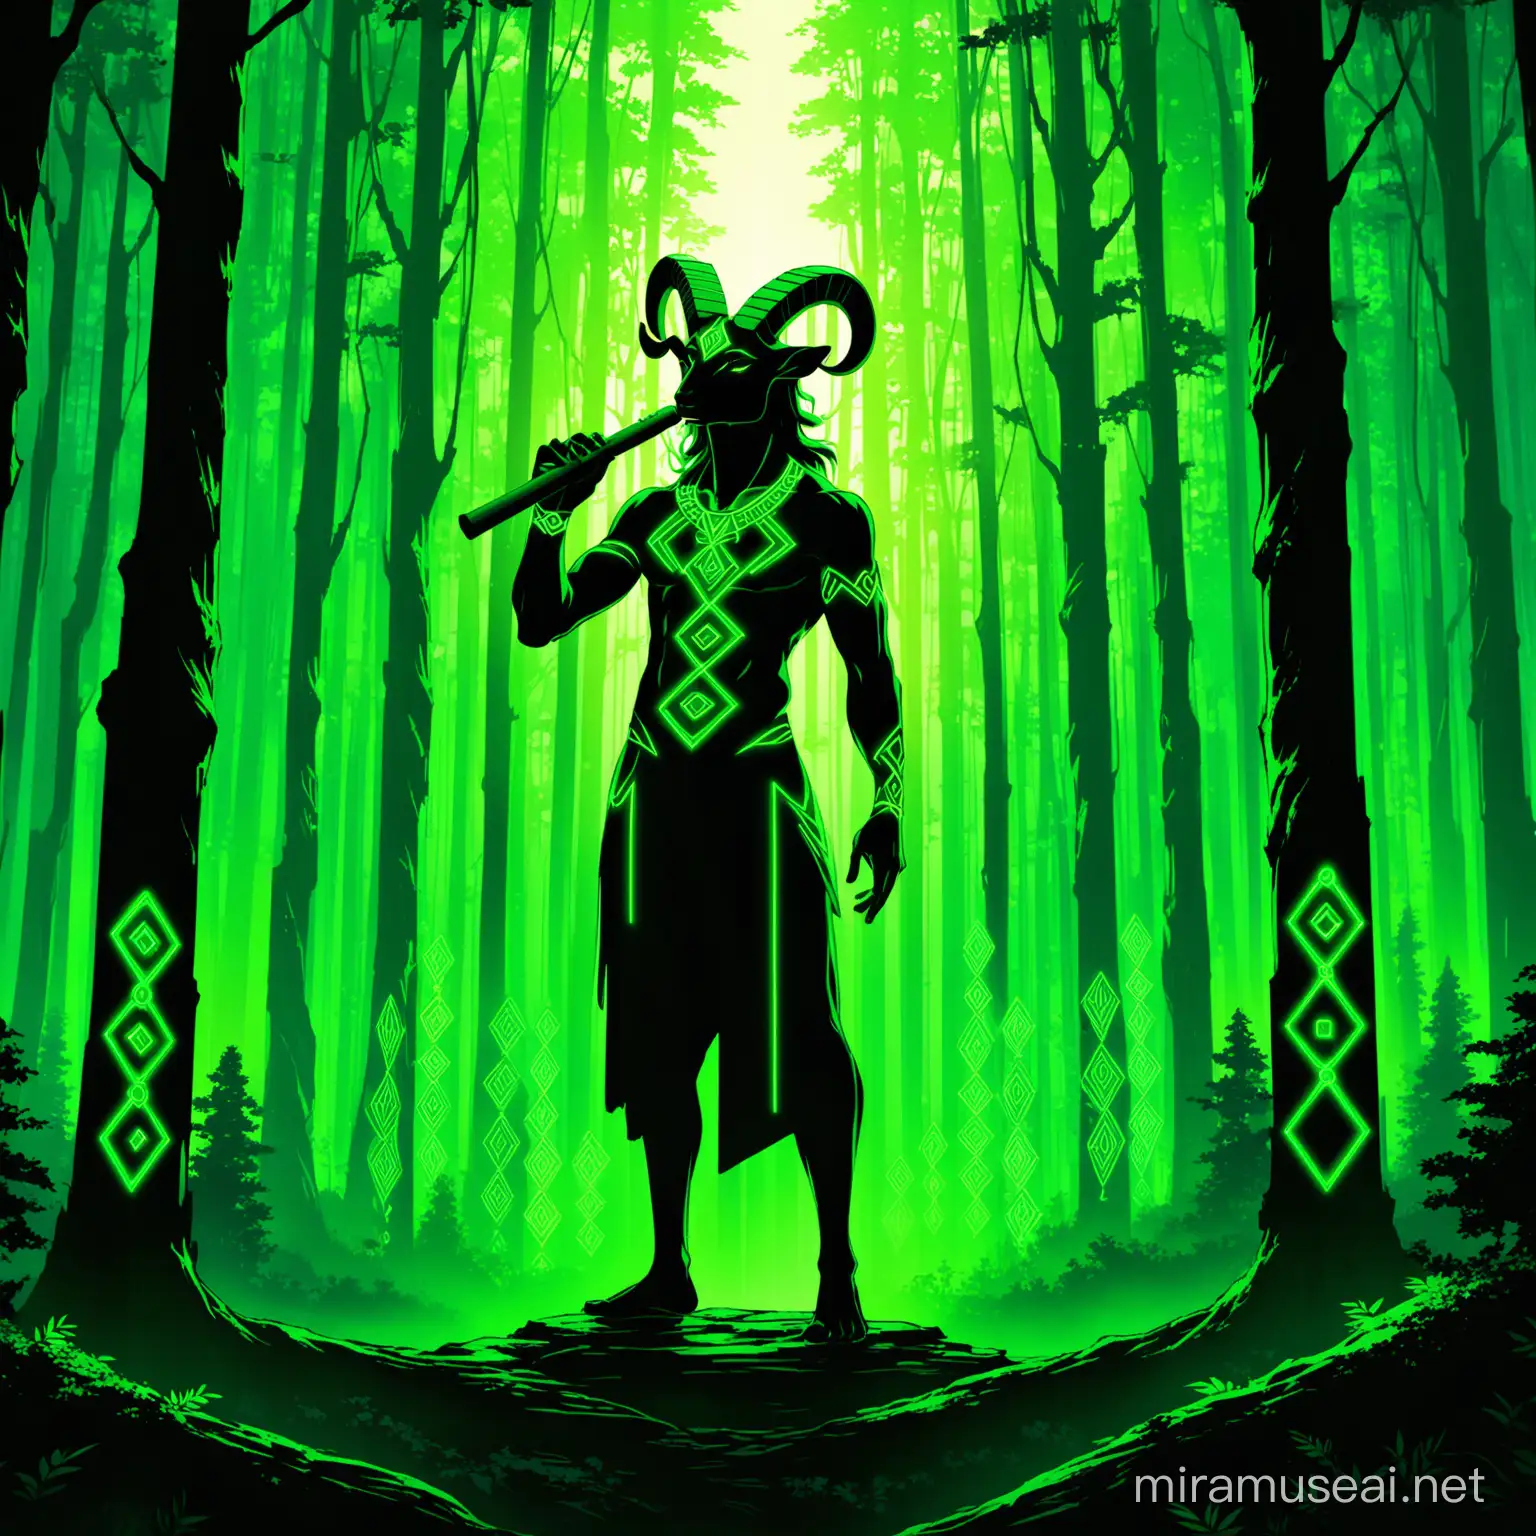 silloutette of Pan (greek-god)
appreance-neon green pan-flute necklace/ full body/ dryads/ horns/ goat legs/ green greek runes/ asymetical posing/cool looking/handsome
background- baige/ noir/ forest/  plants/ 